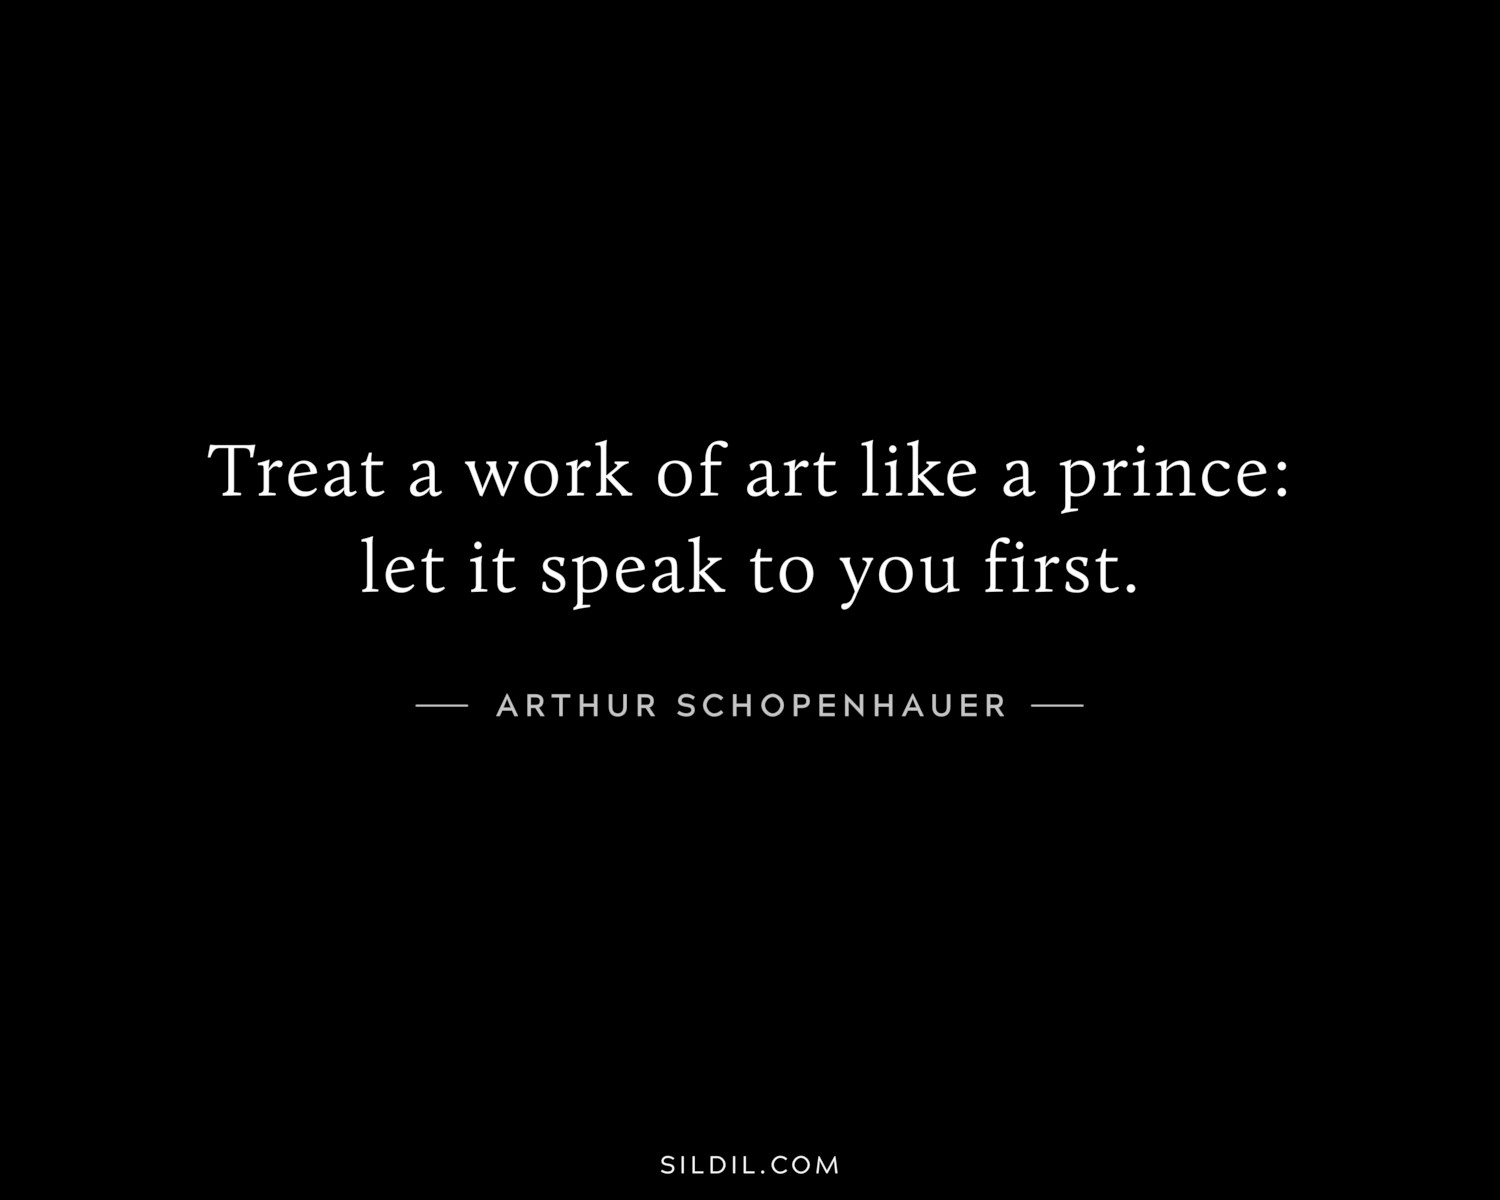 Treat a work of art like a prince: let it speak to you first.